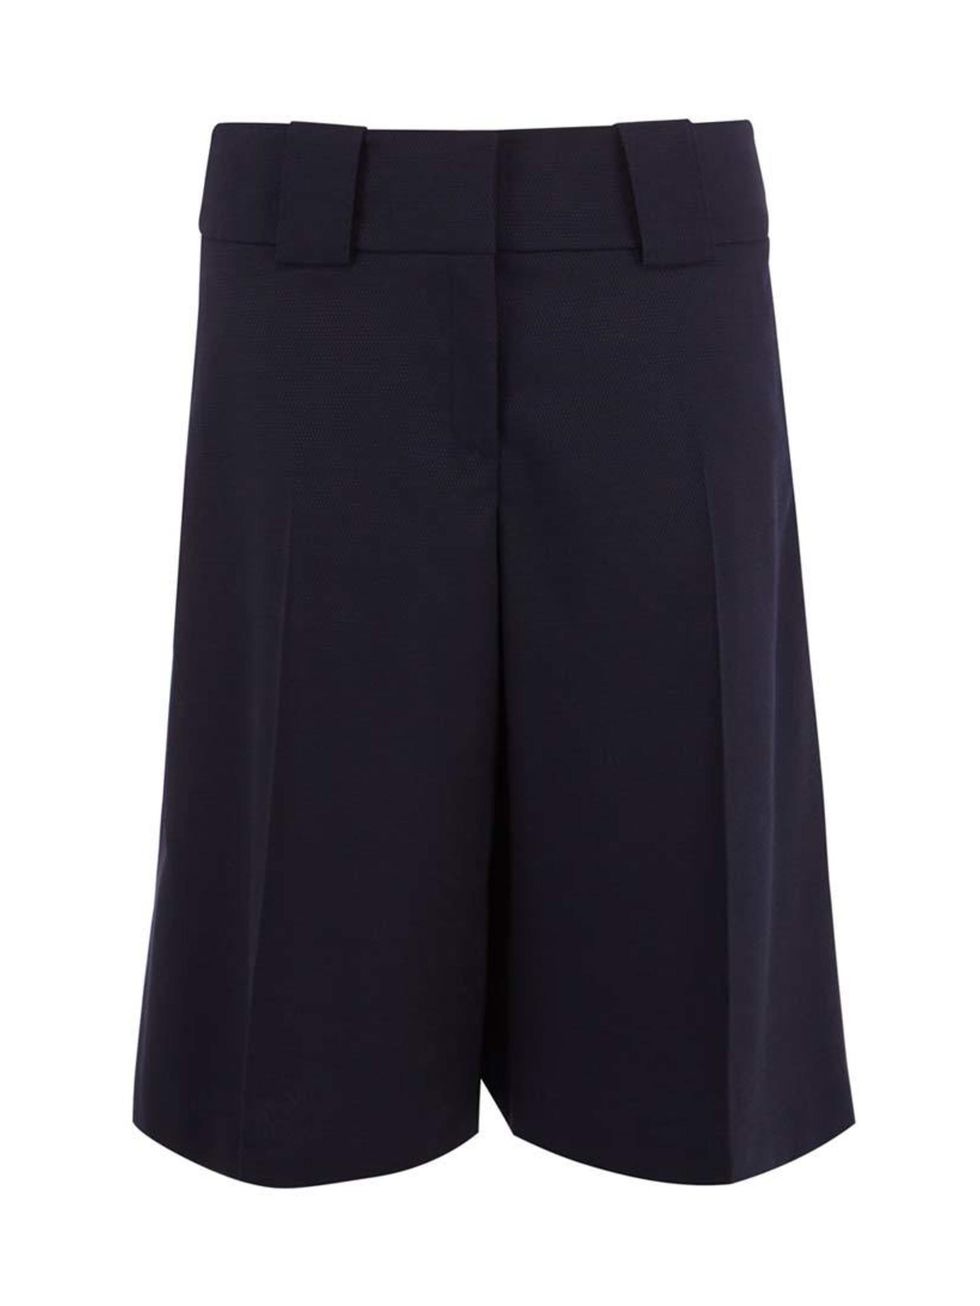 <p>Tuck a fine-knit jumper into culottes for a modern take on workwear.</p>

<p><a href="http://www.karenmillen.com/culotte/new-in/karenmillen/fcp-product/043PV01706" target="_blank">Karen Millen</a> culottes, £99</p>